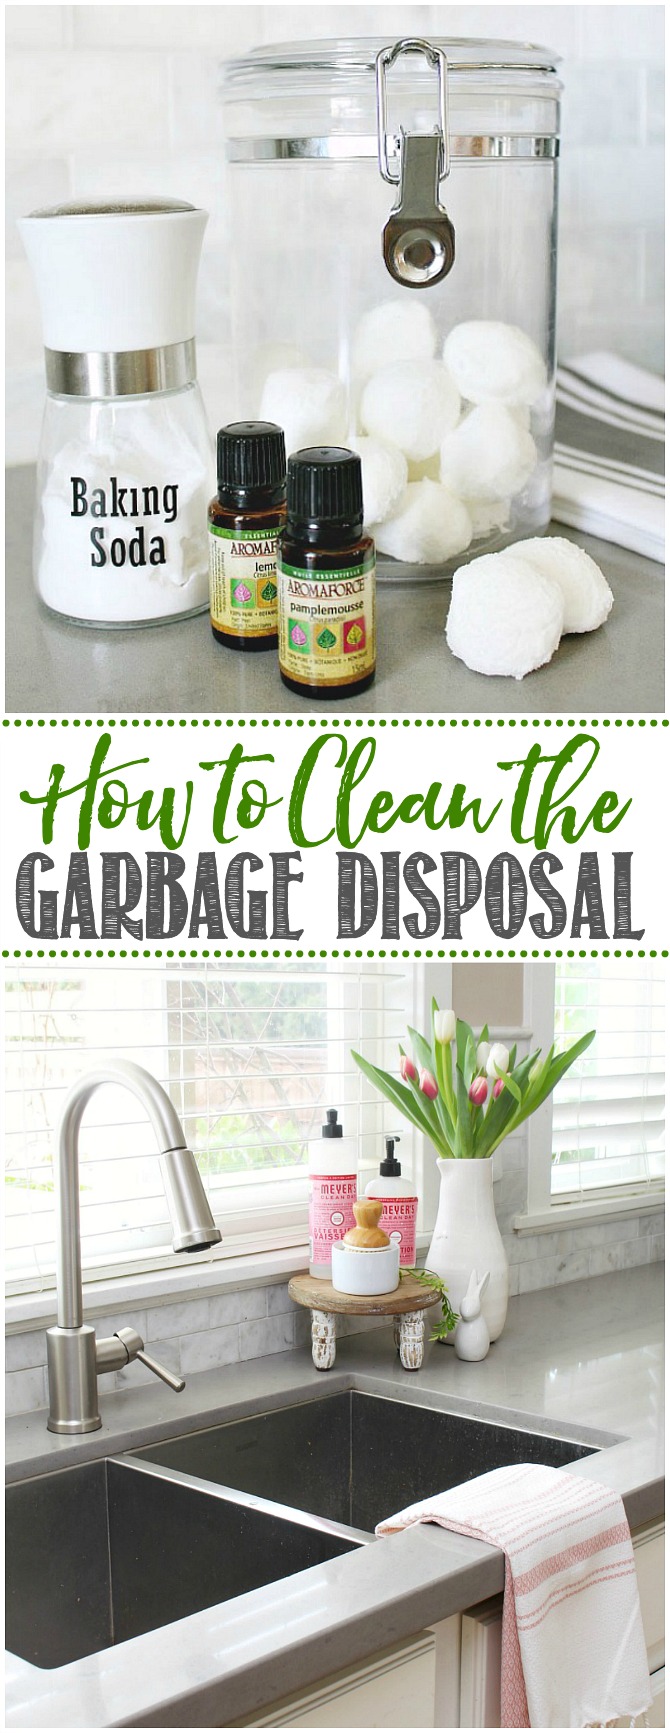 How to Clean the Garbage Disposal {All Natural} Clean